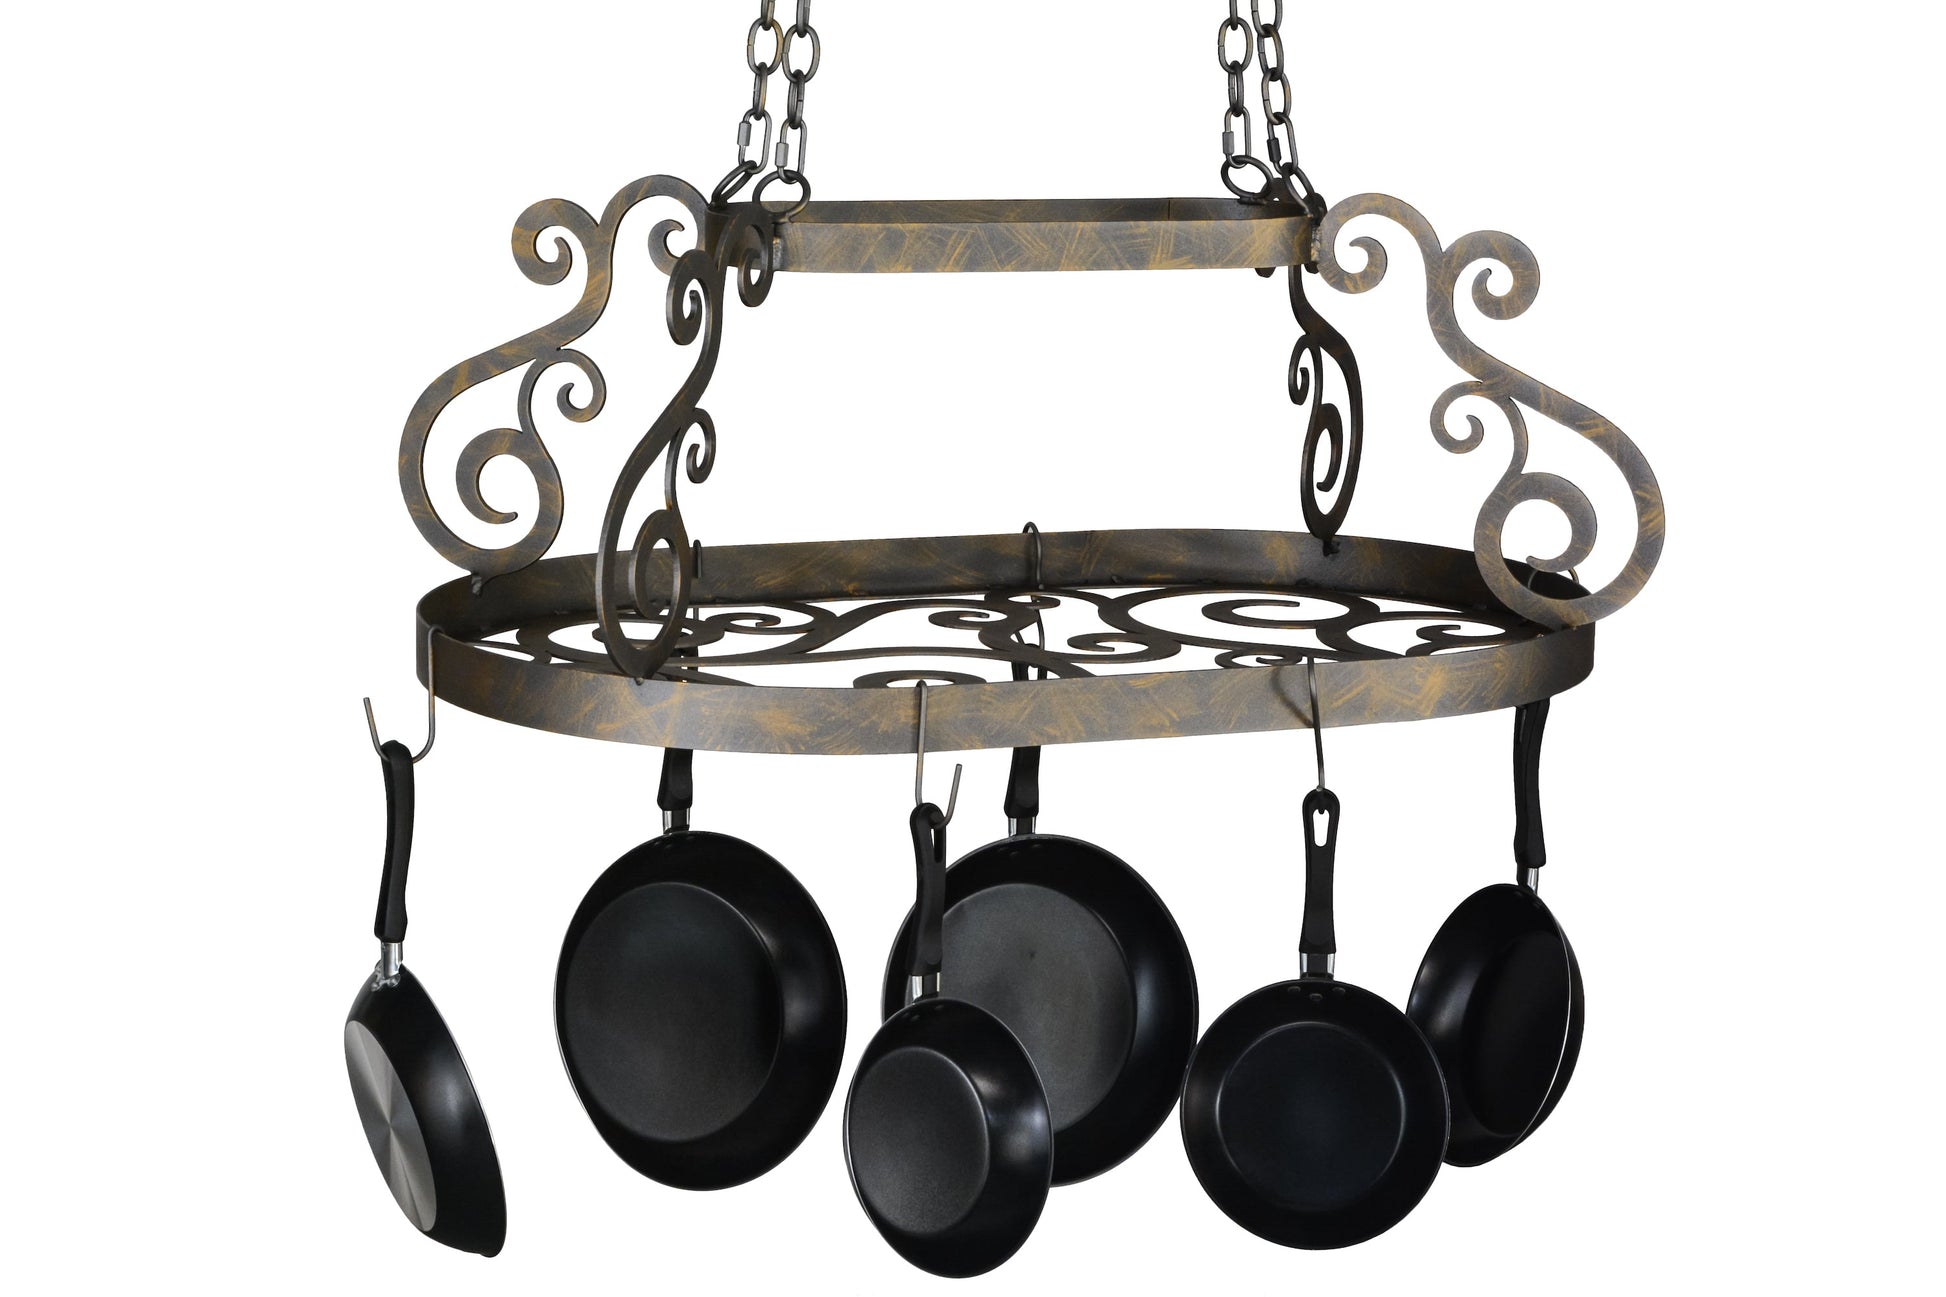 38" Neo Pot Rack by 2nd Ave Lighting